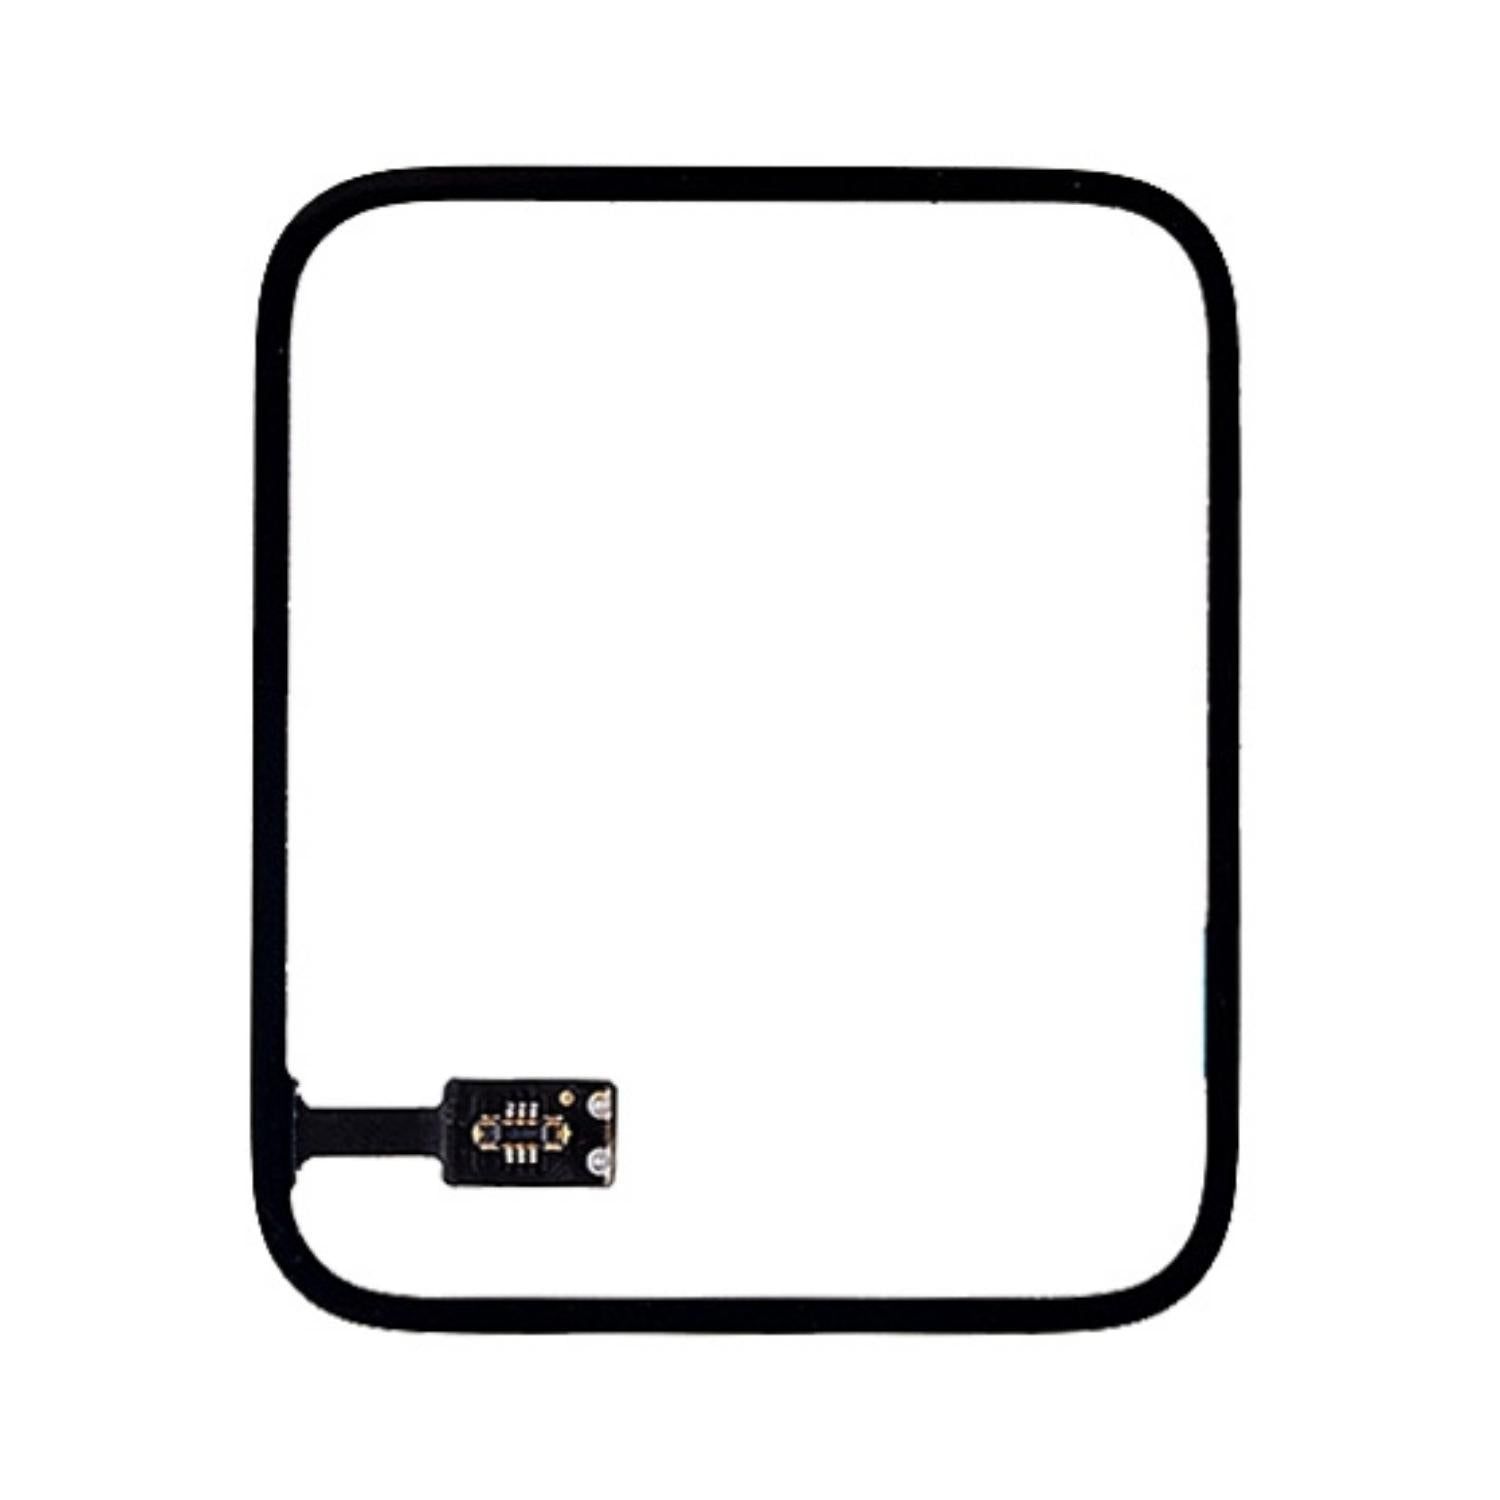 Force Touch Sensor for Apple Watch Series 3 (38MM) (GPS only)